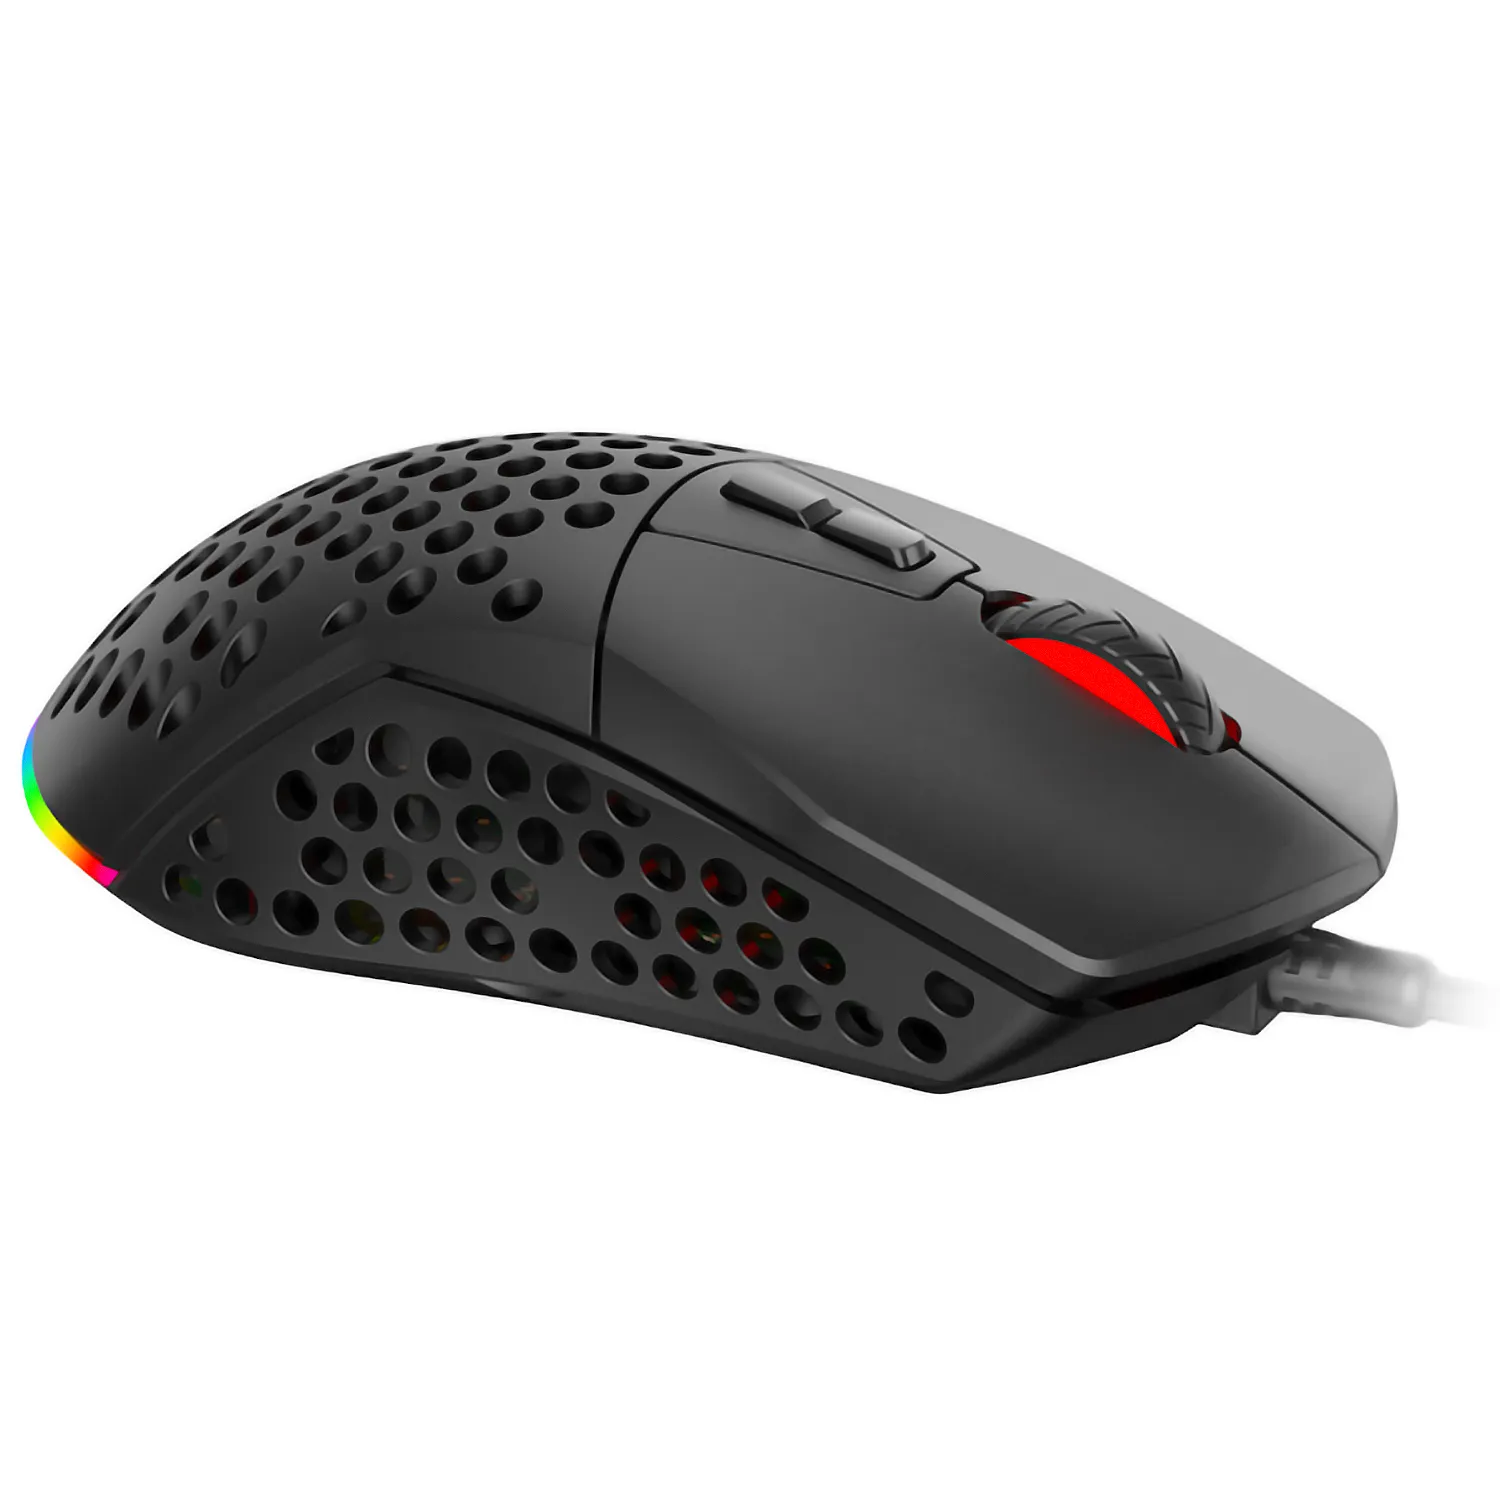 Mouse Gamer Programable RGB Havit MS885 Laterales Intercambiables